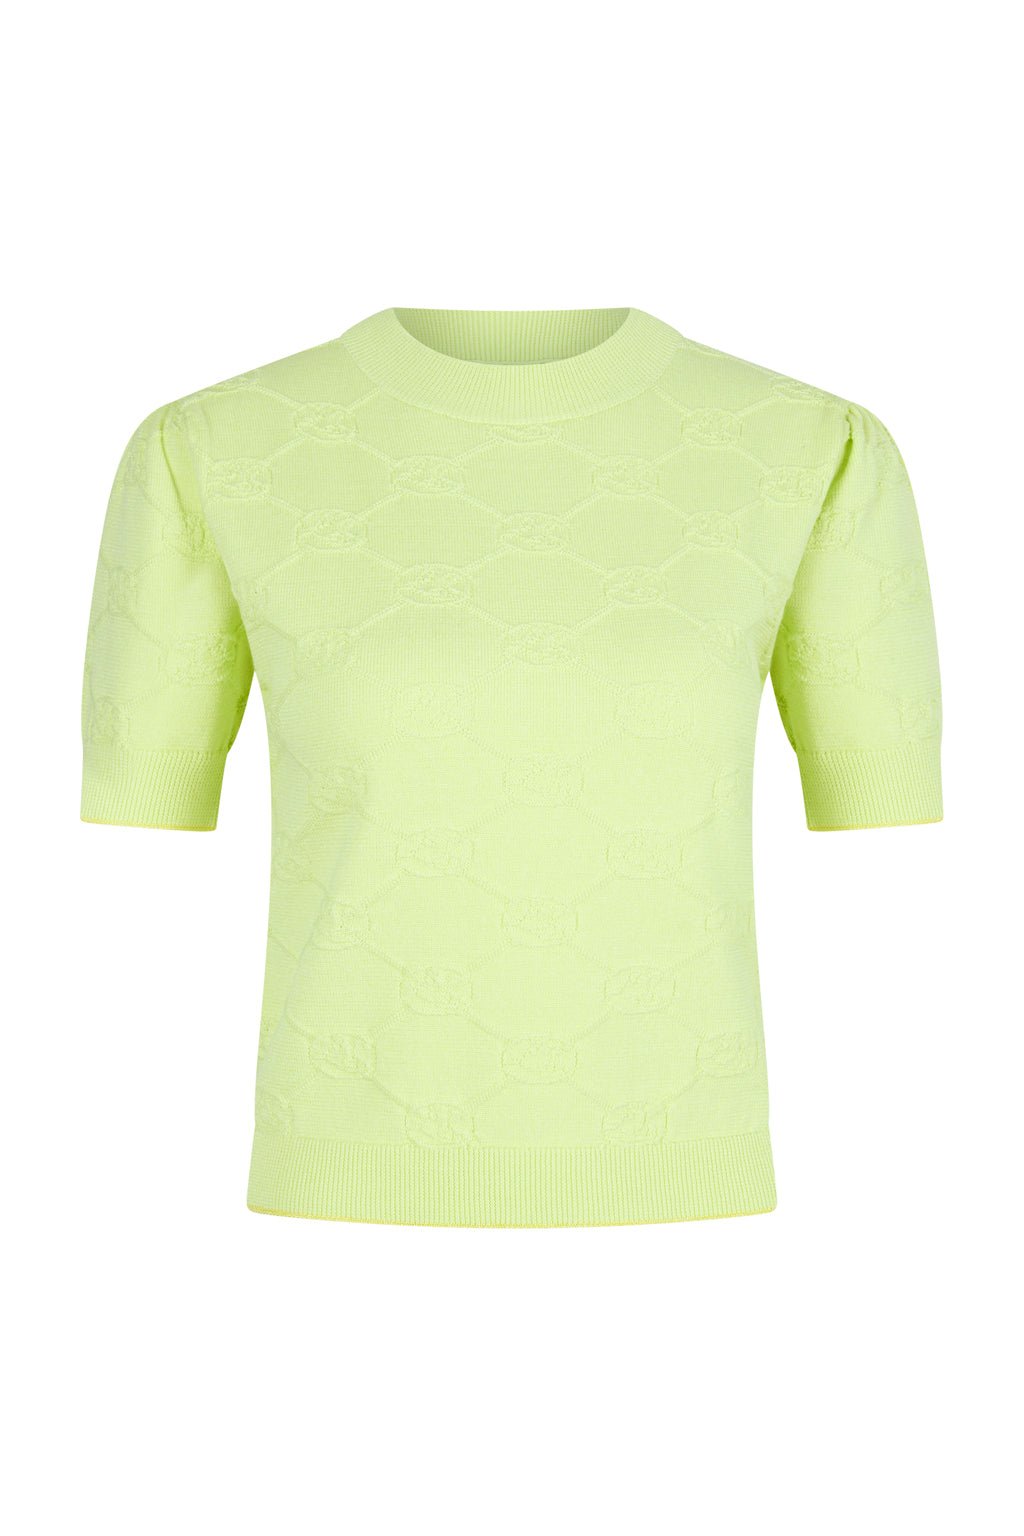 KNIT TOP SS BODY FIT - LIME GREEN - Love Sophia